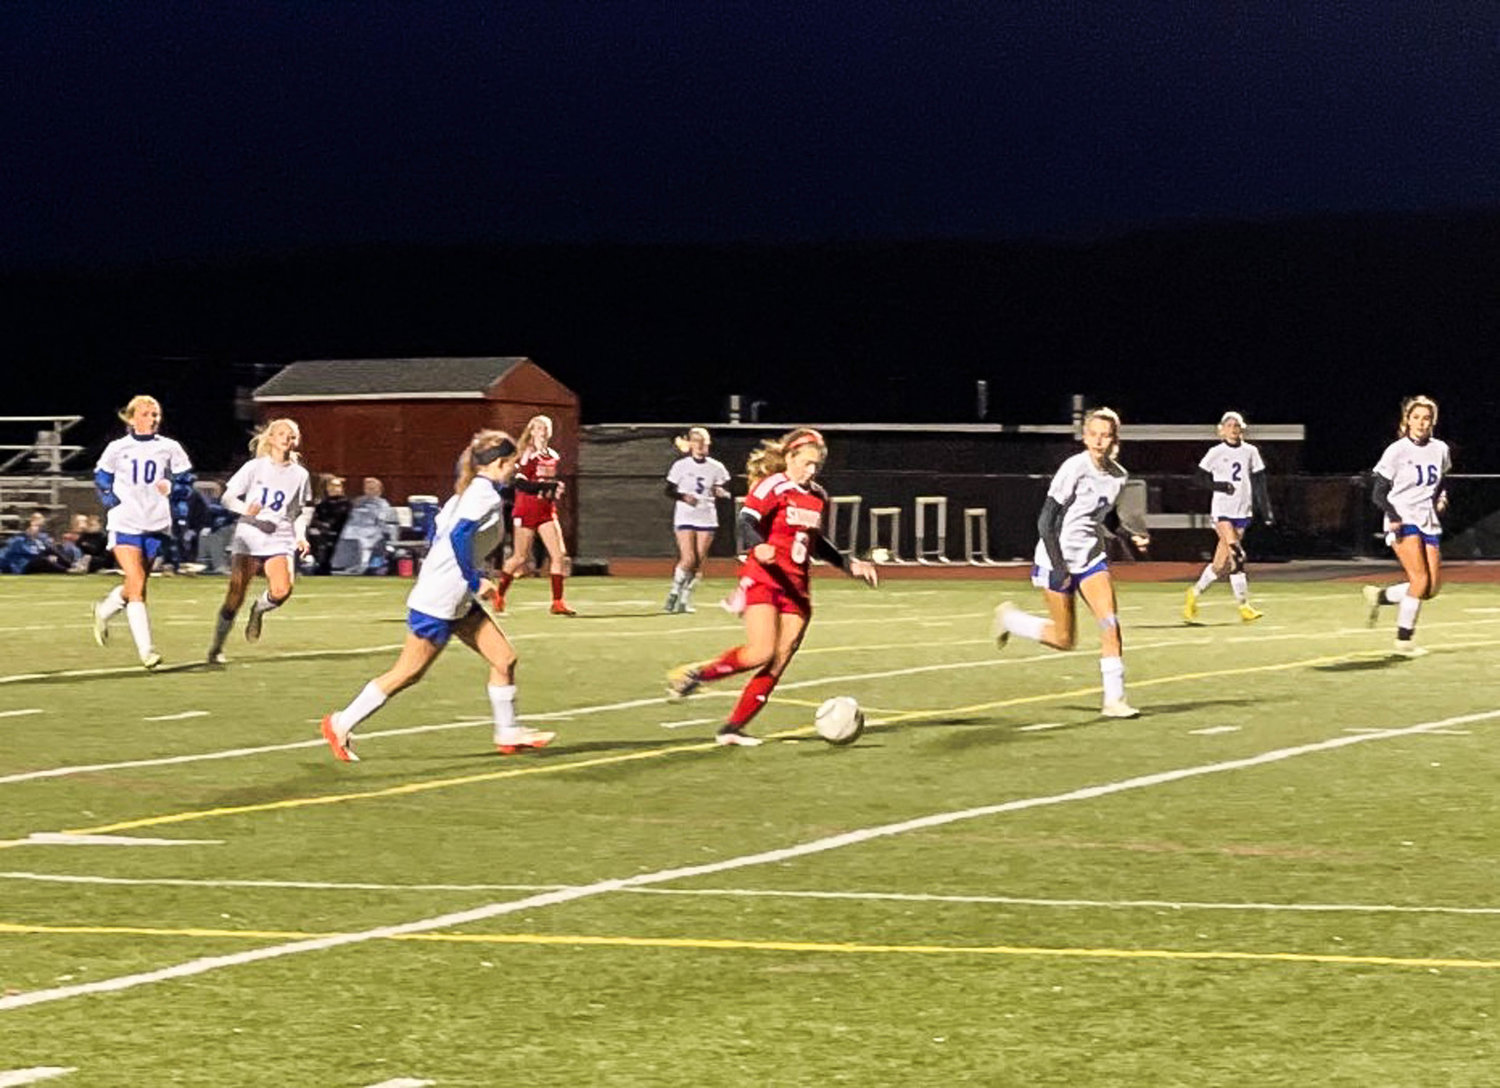 Sauquoit Valley’s Kaitlyn Corr dribbles through the Dolgeville defense Thursday in the team’s 4-1 win. She scored a goal and had an assist. Sauquoit is the three seed in the Section III Class C playoffs and will take on undefeated second seed Beaver River Tuesday in the semifinals.